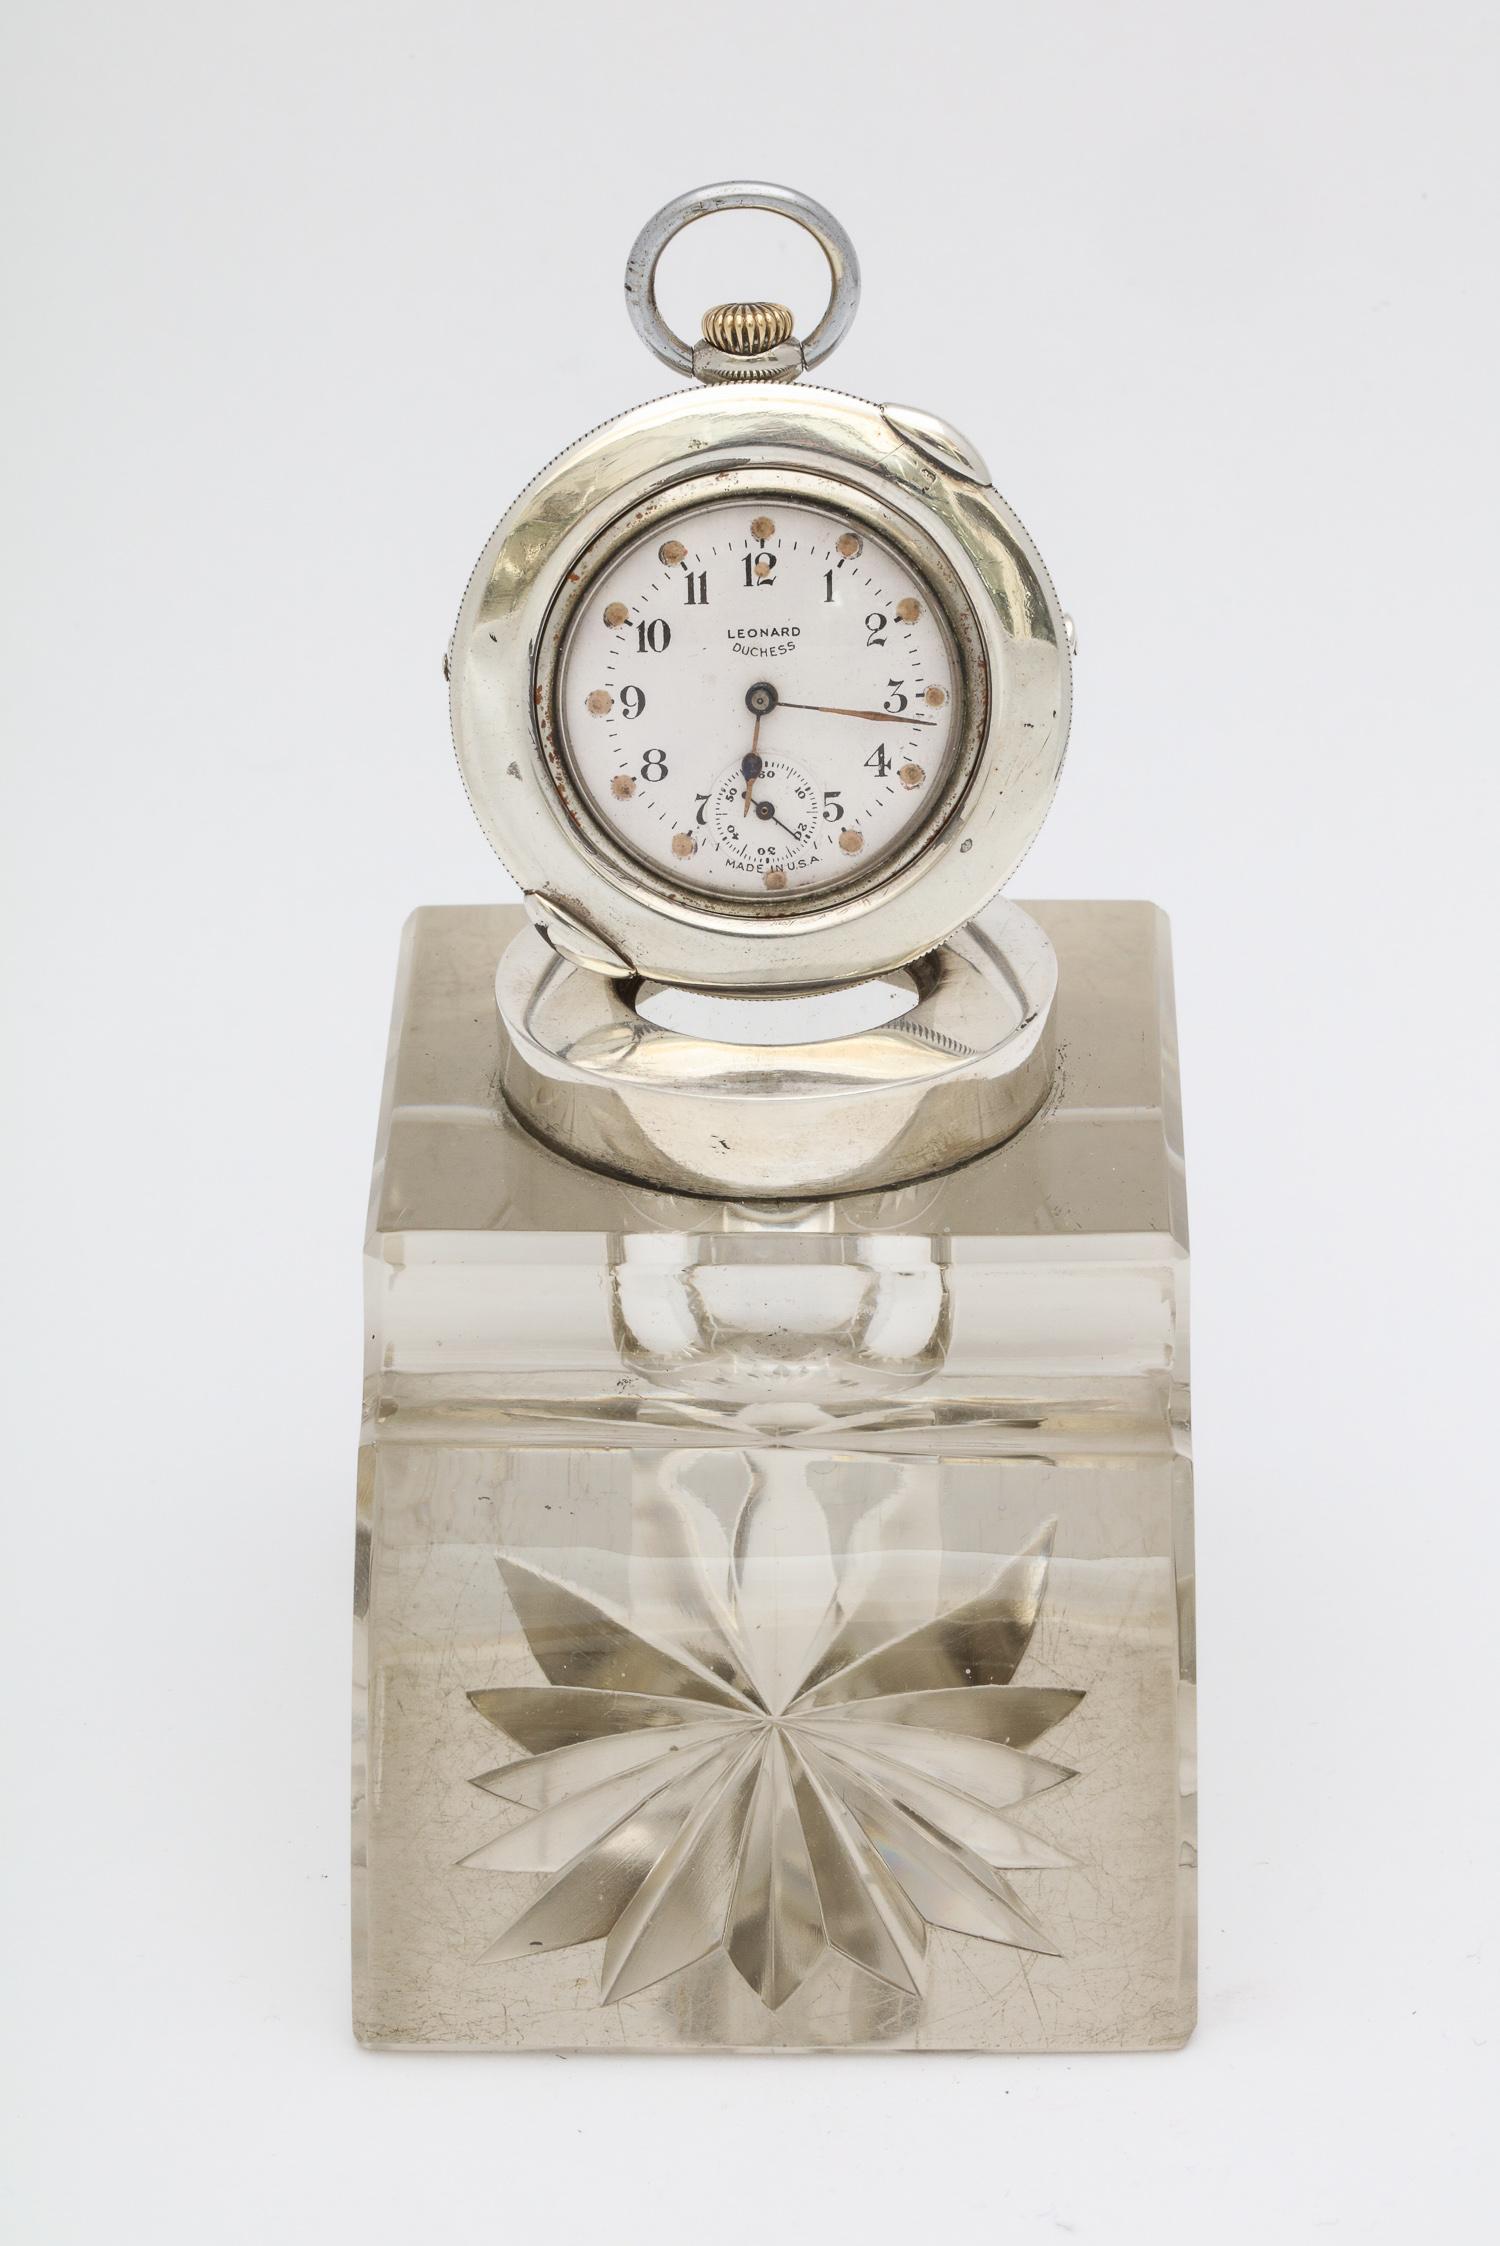 Unusual, Edwardian, sterling silver-mounted crystal inkwell or pocket watch holder, Birmingham, England, 1902, J. Grinsell and Son - makers. Measures 3 1/4 inches high when watch holder is lying flat (4 3/4 inches high when watch holder is in raised